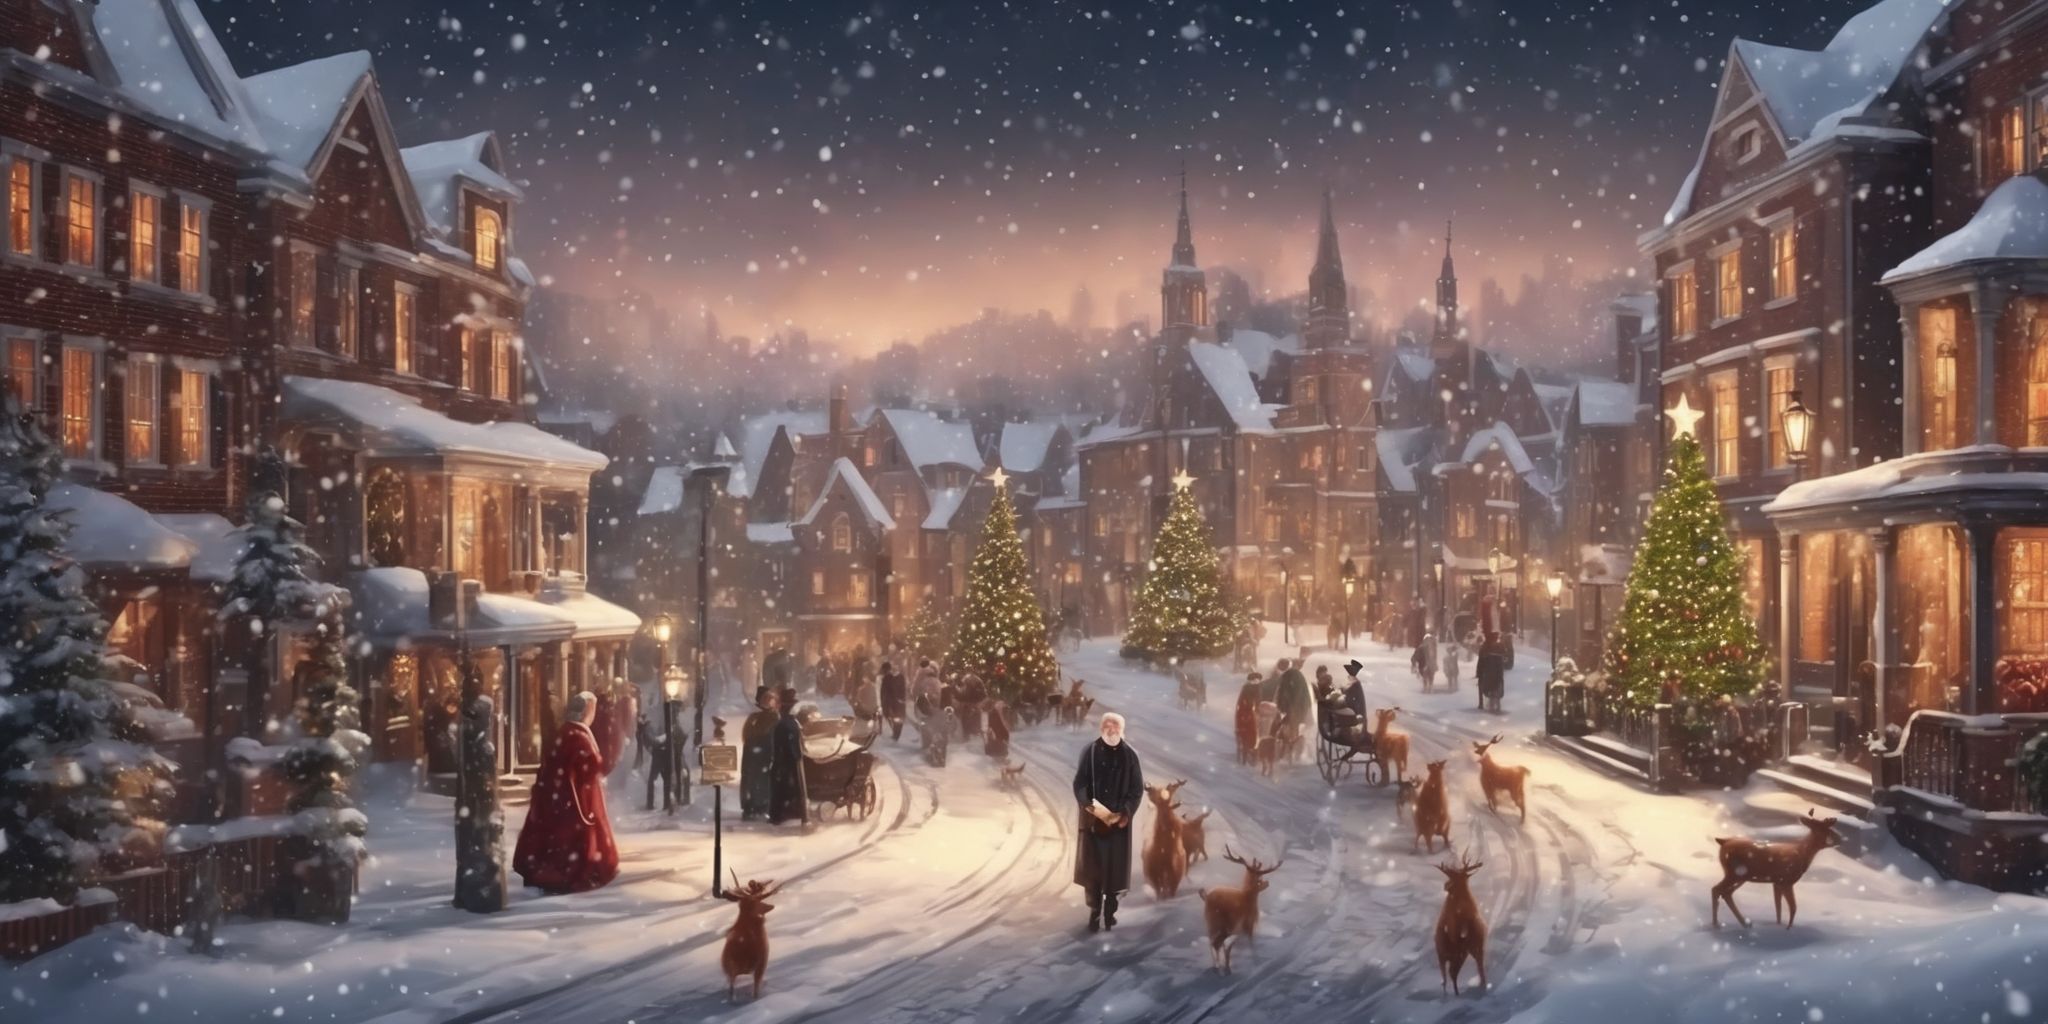 Christmas carol in realistic Christmas style